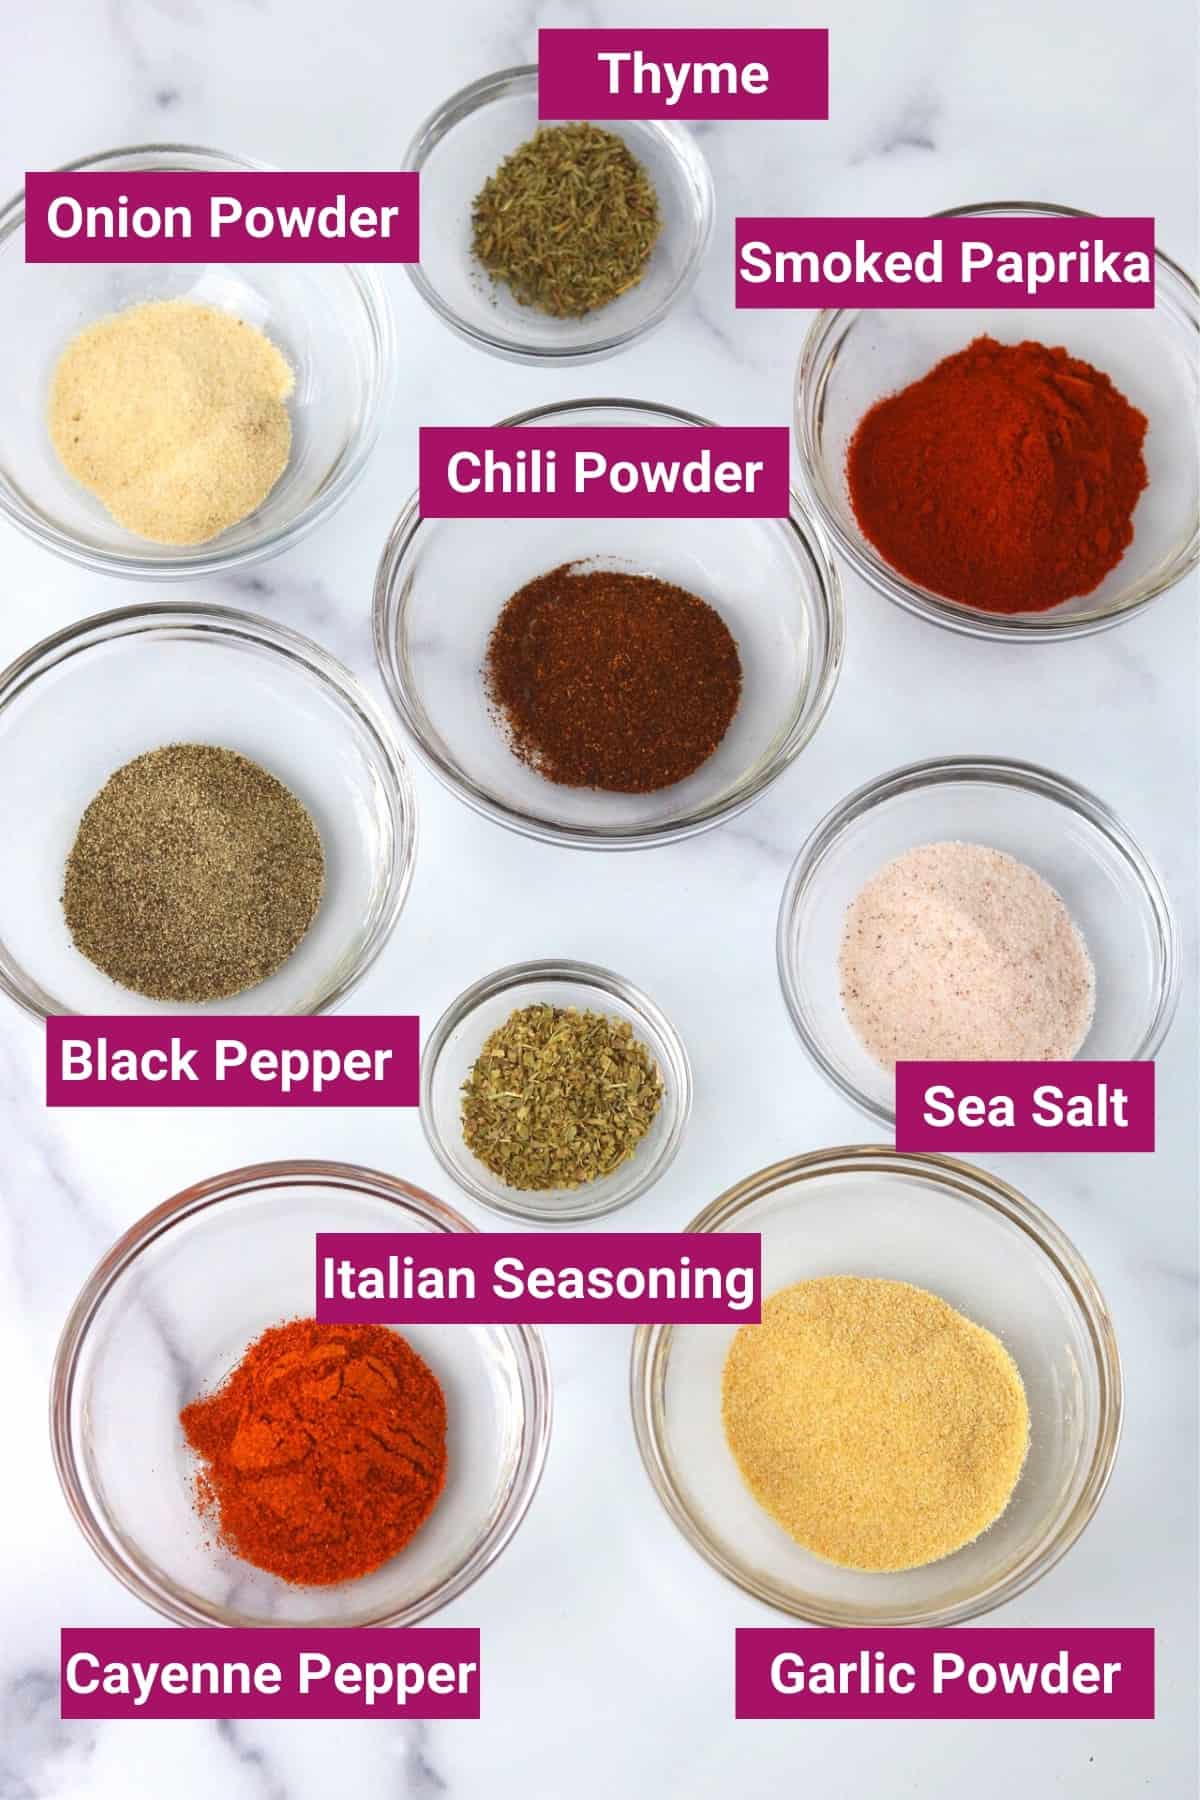 photo of the spices used to make homemade chicken dry rub: black pepper, Italian seasoning, sea salt, chili powder, smoked paprika, garlic powder, thyme, and cayenne pepper.